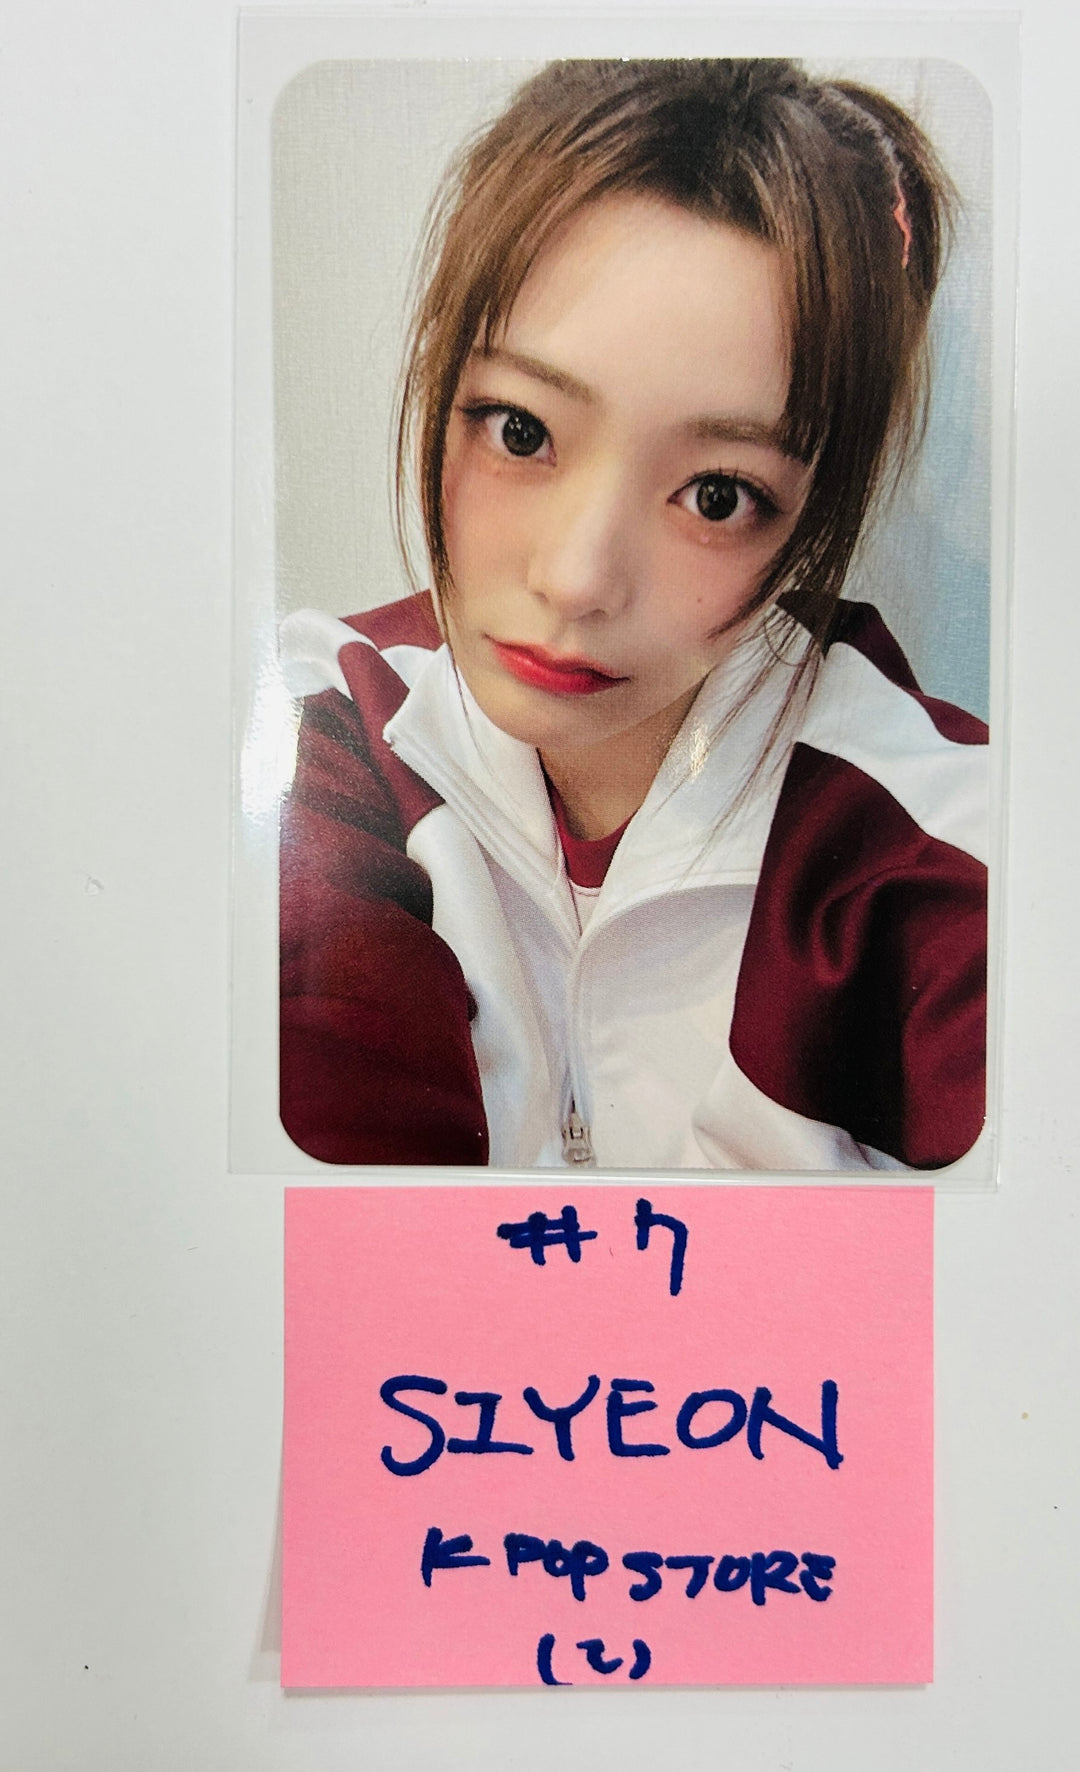 QWER "MANITO" - K-Pop Store Fansign Event Photocard [24.6.7]